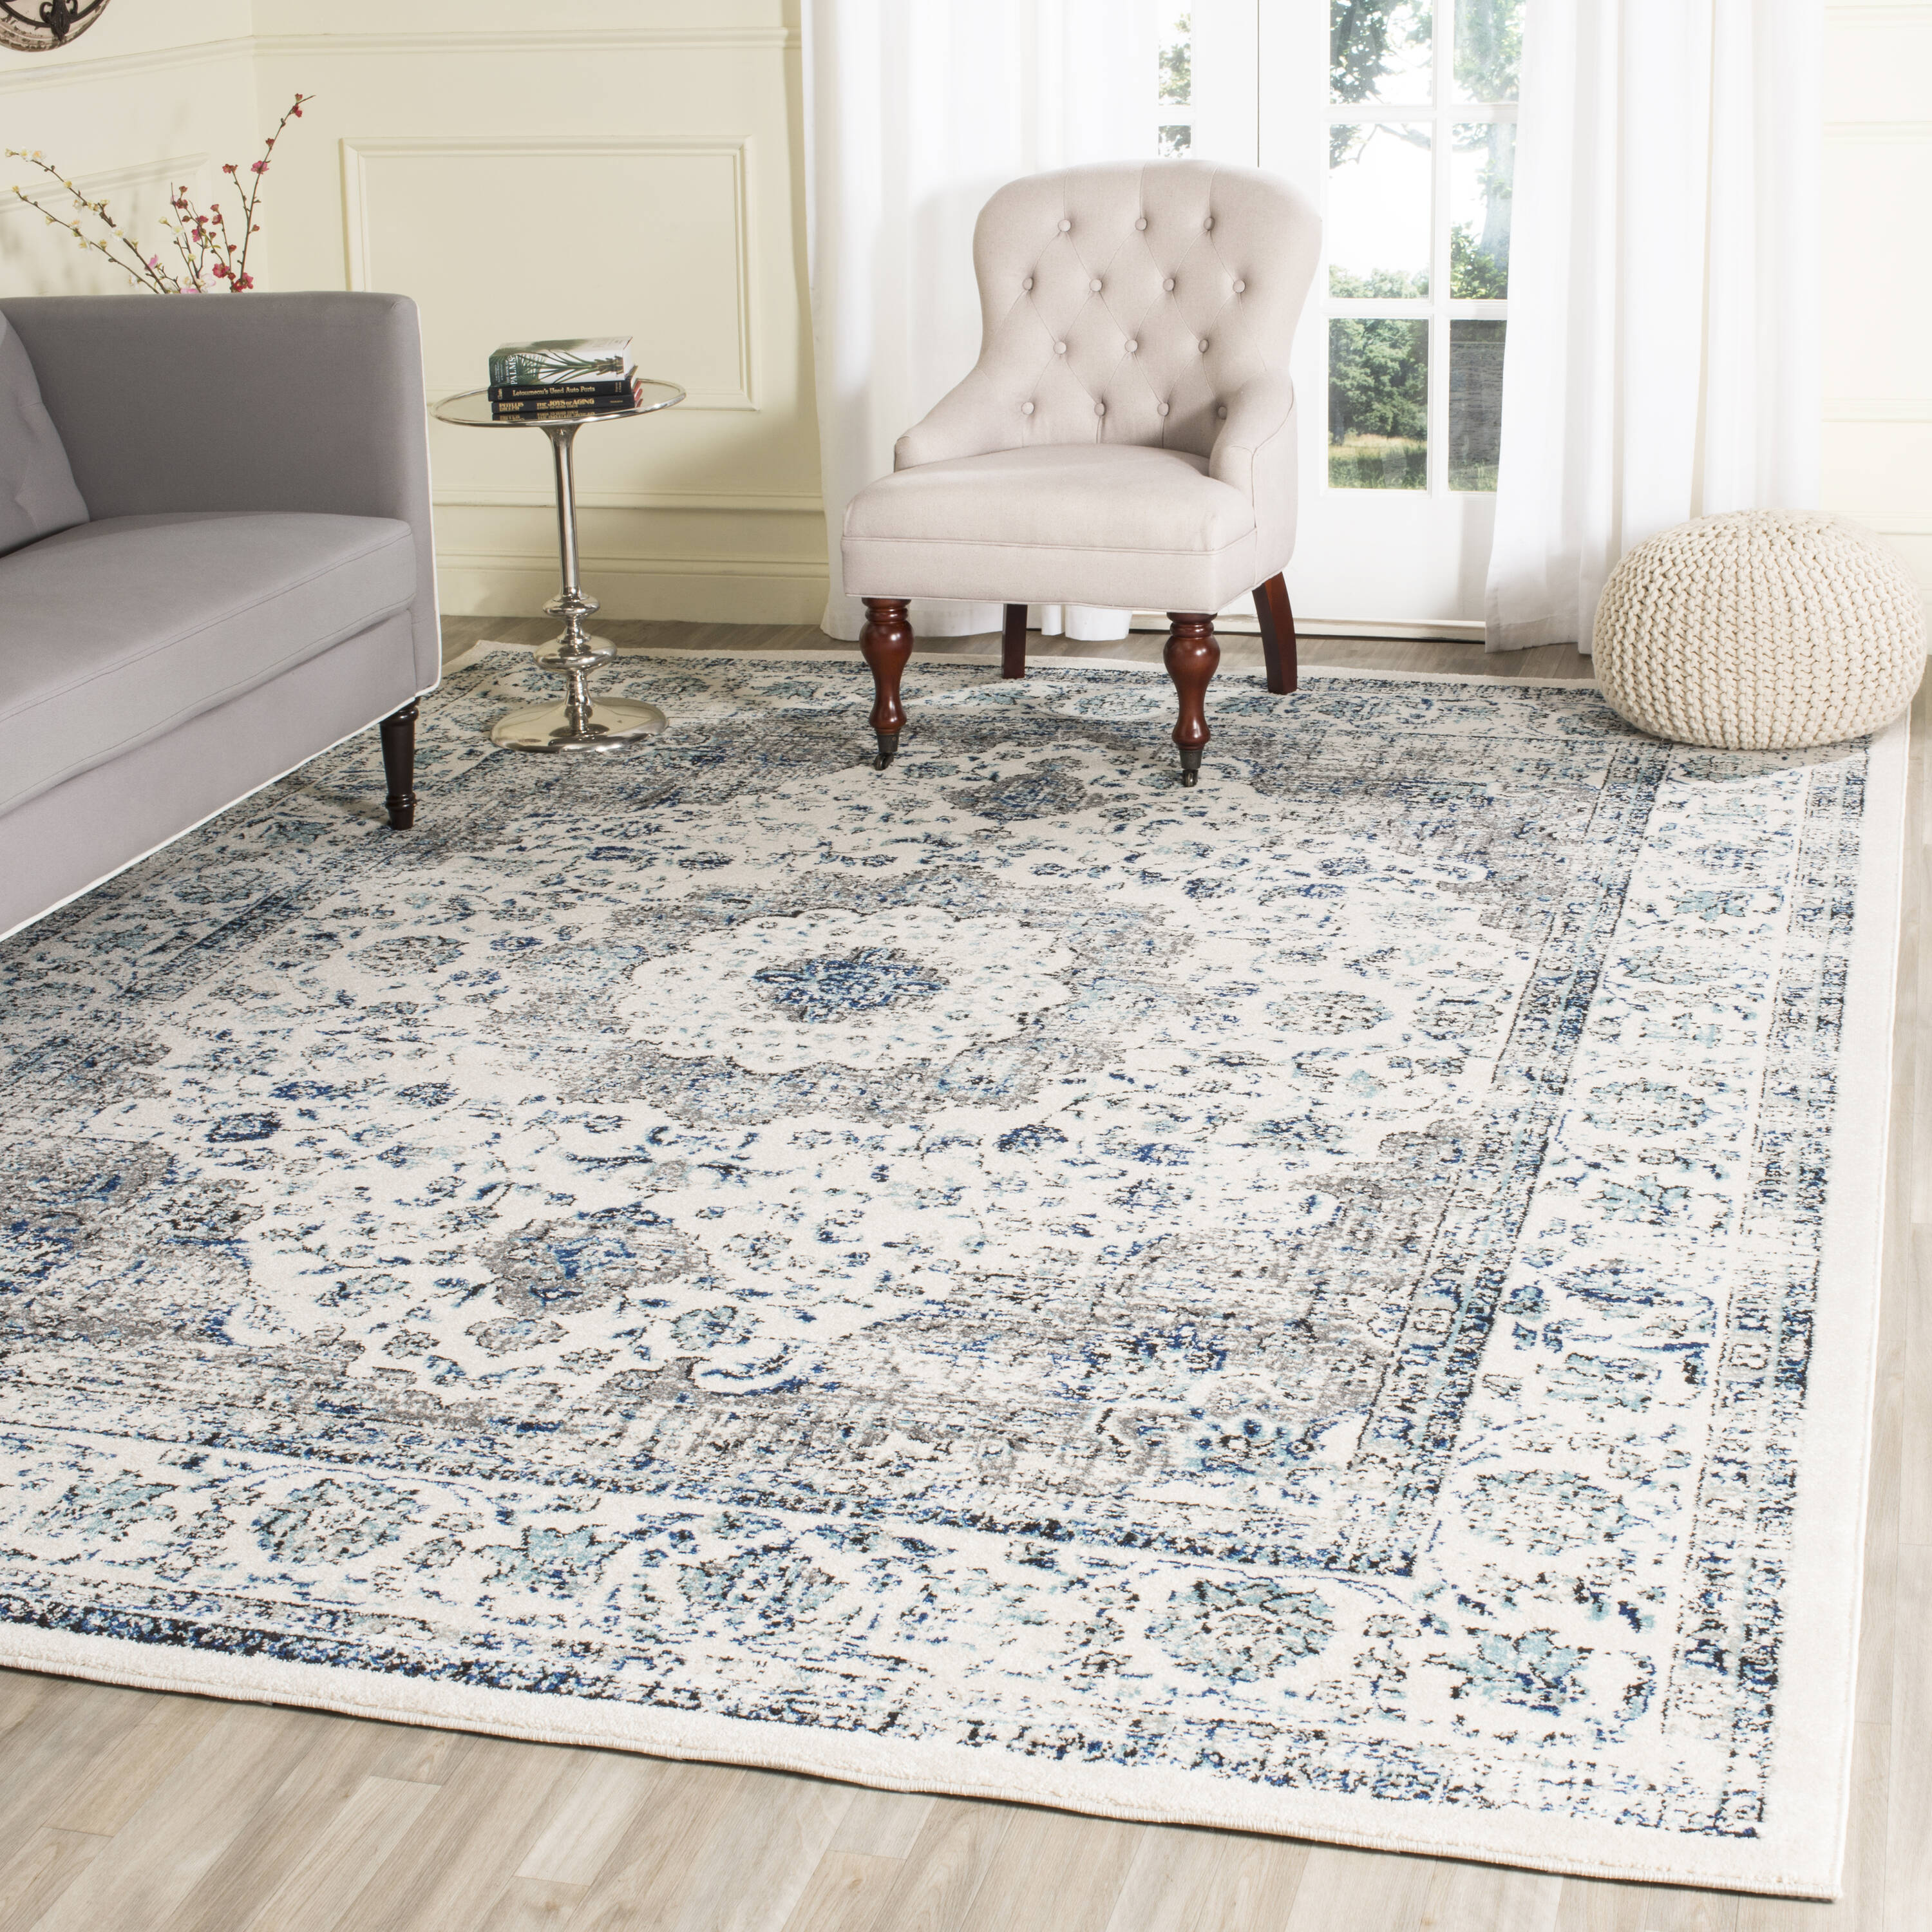 Safavieh Evoke Savoy 9 X 12 Gray Ivory Indoor Fl Botanical Vintage Area Rug In The Rugs Department At Lowes Com